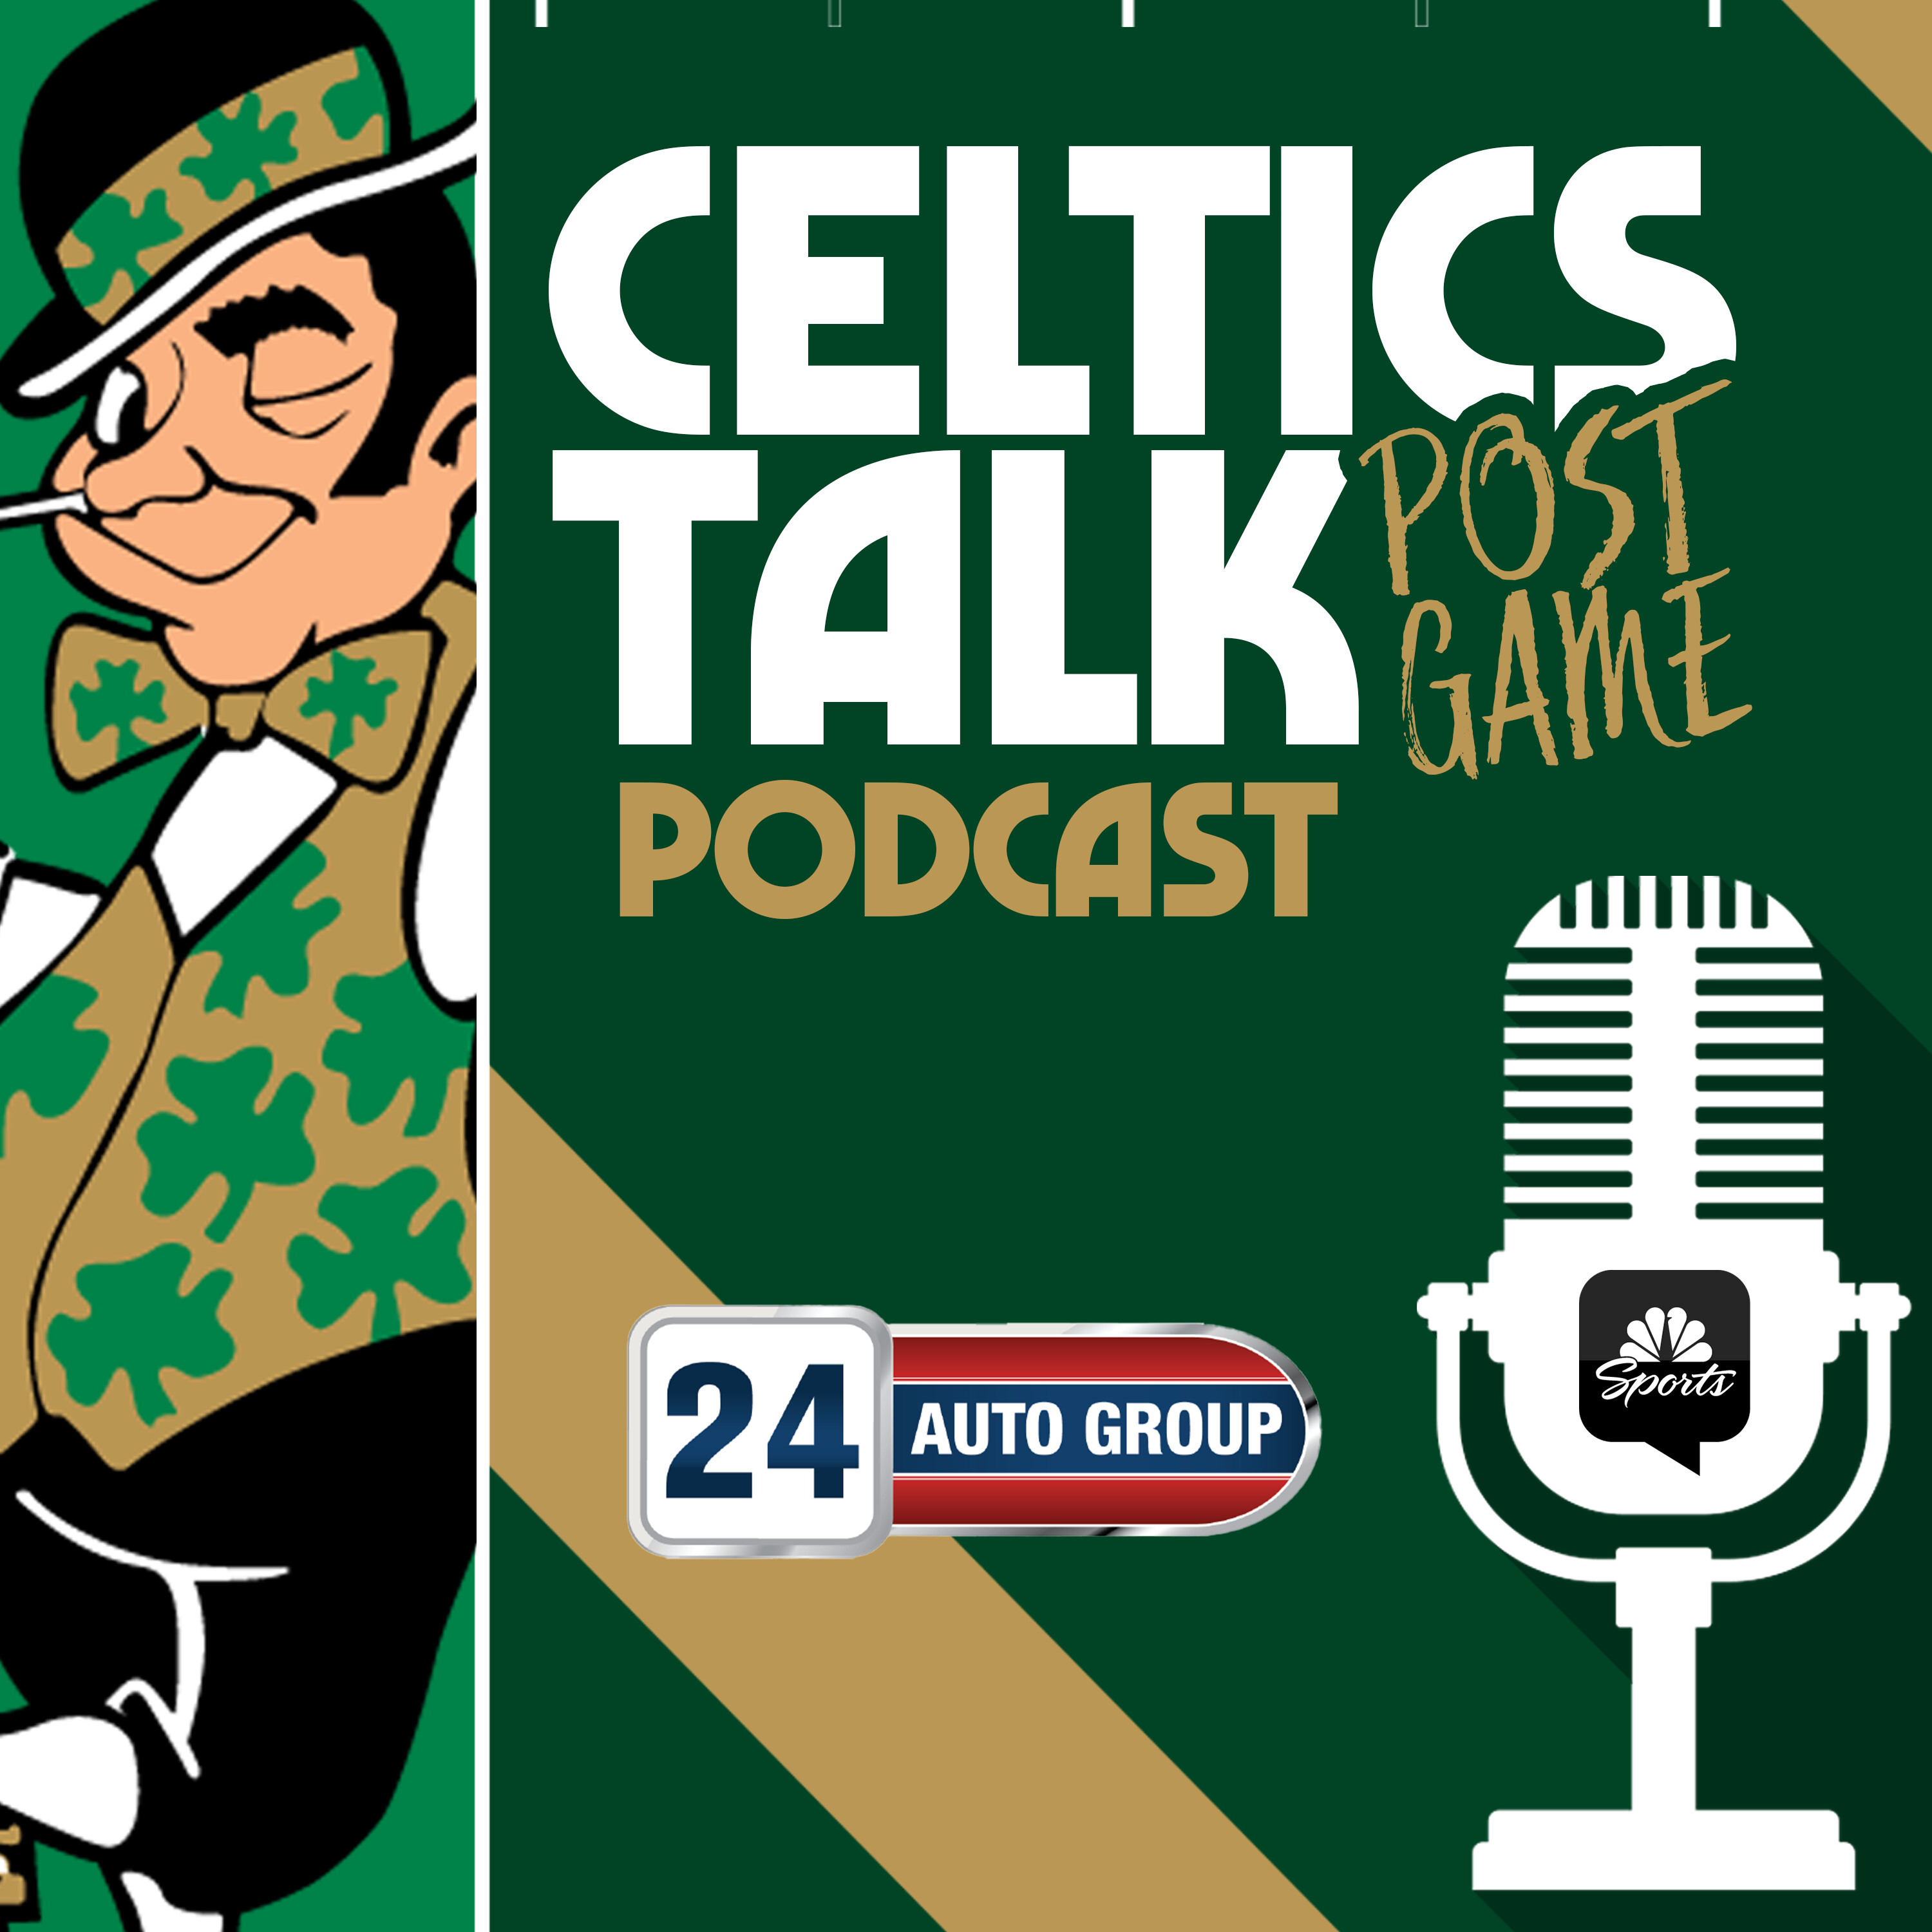 POSTGAME POD: Celtics ”outplayed, outhustled” by the Magic in double-digit loss